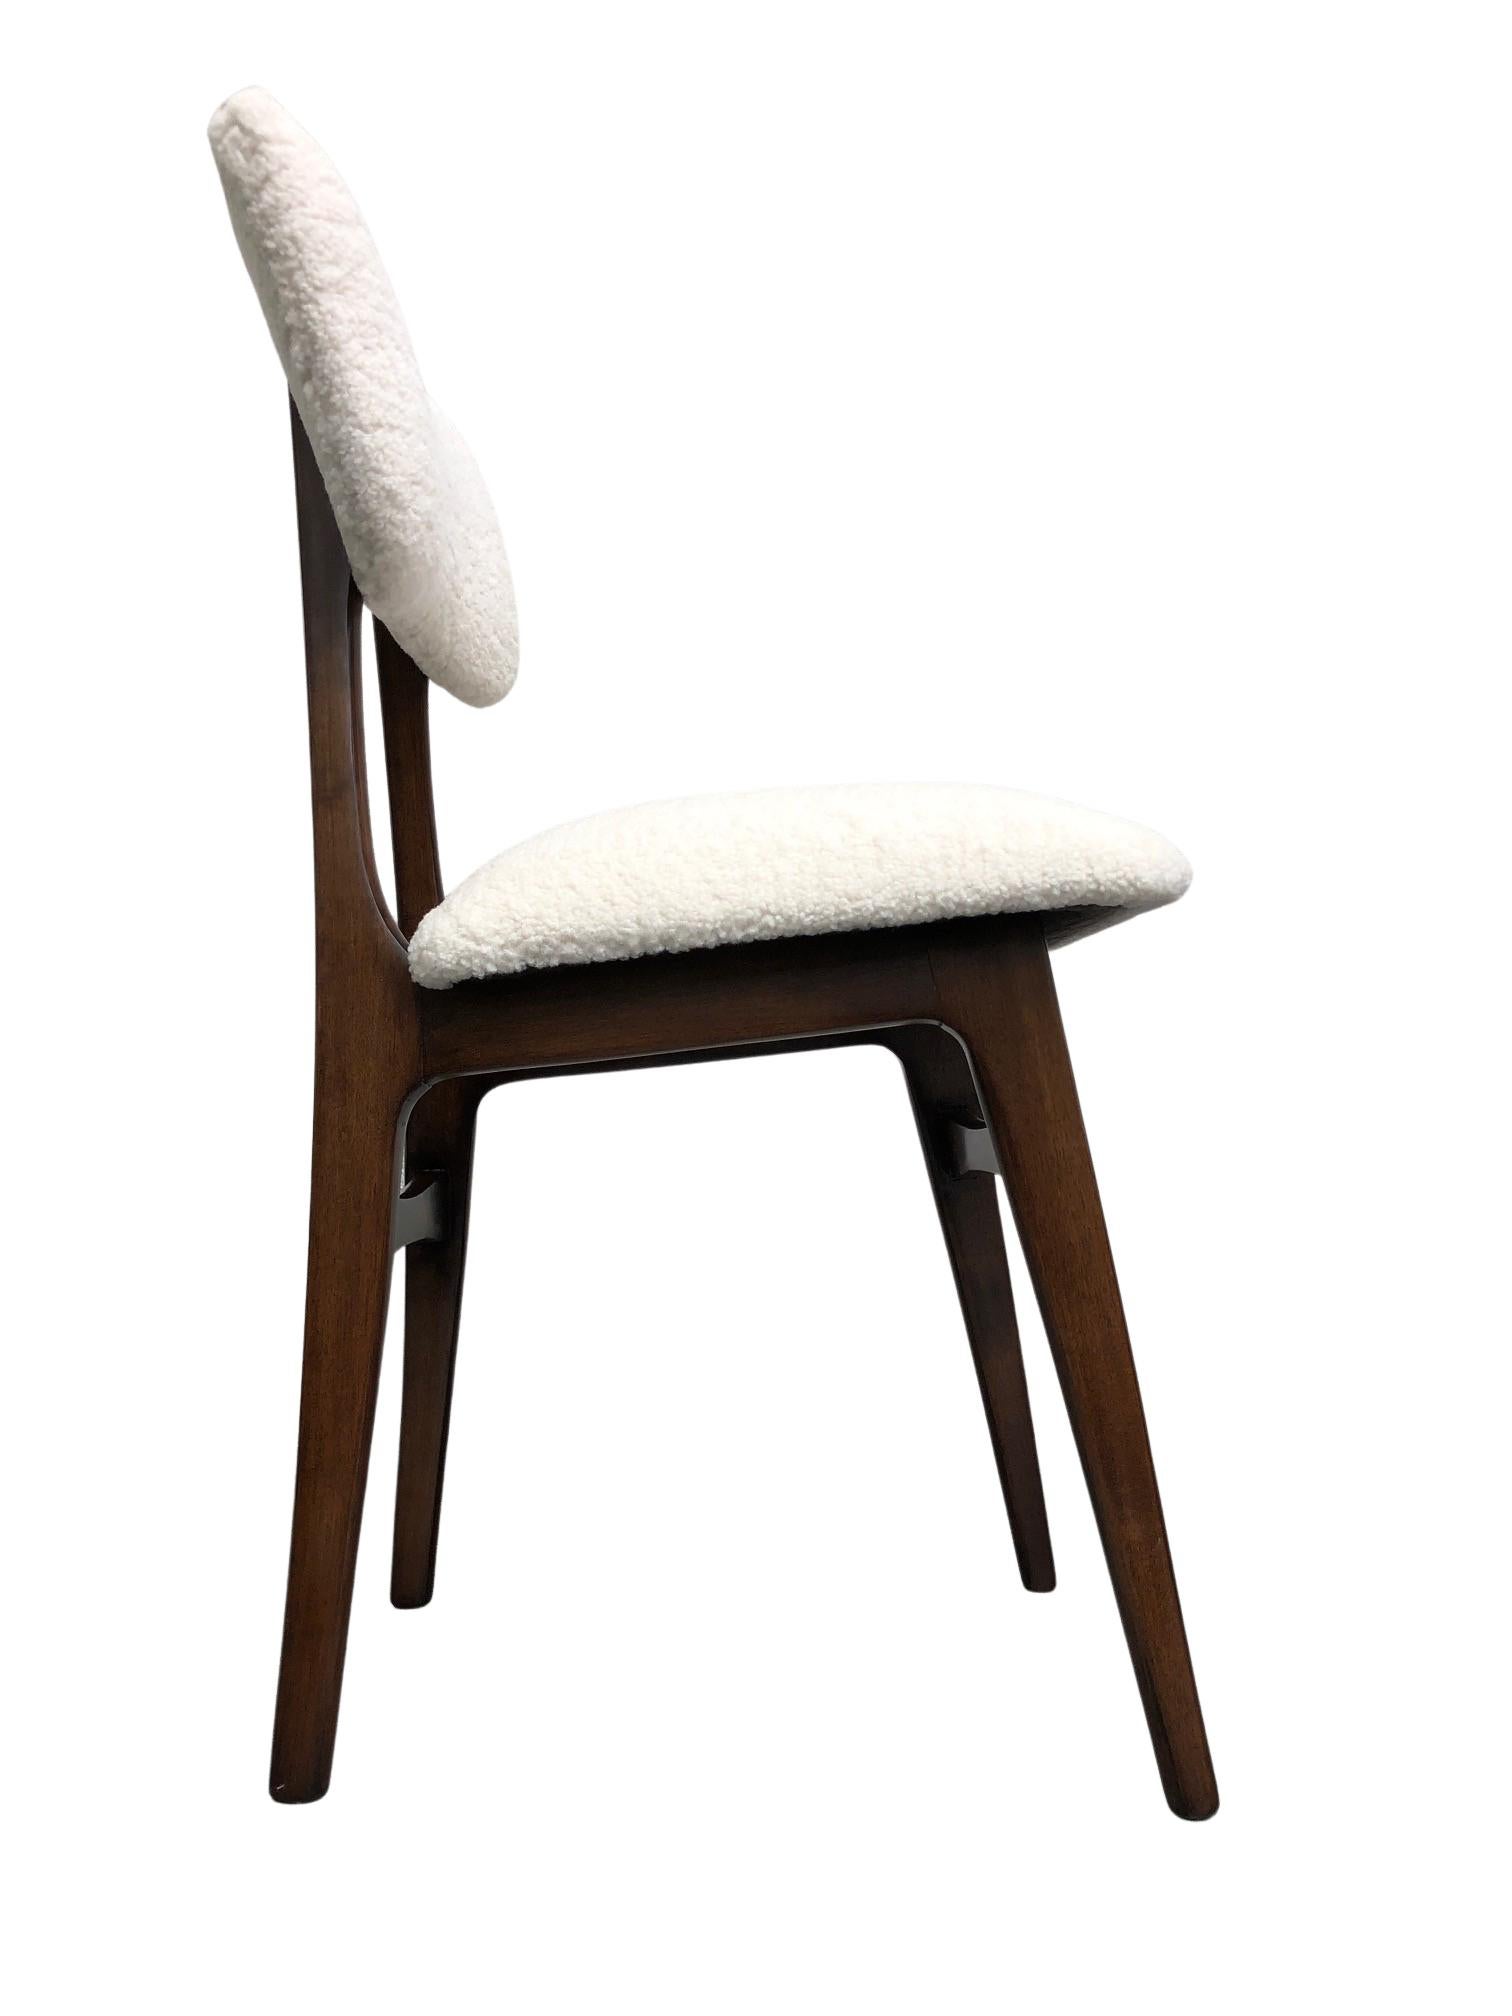 Bouclé Mid-Century Beige Boucle and Dark Wood Dining Chair, Europe, 1960s For Sale